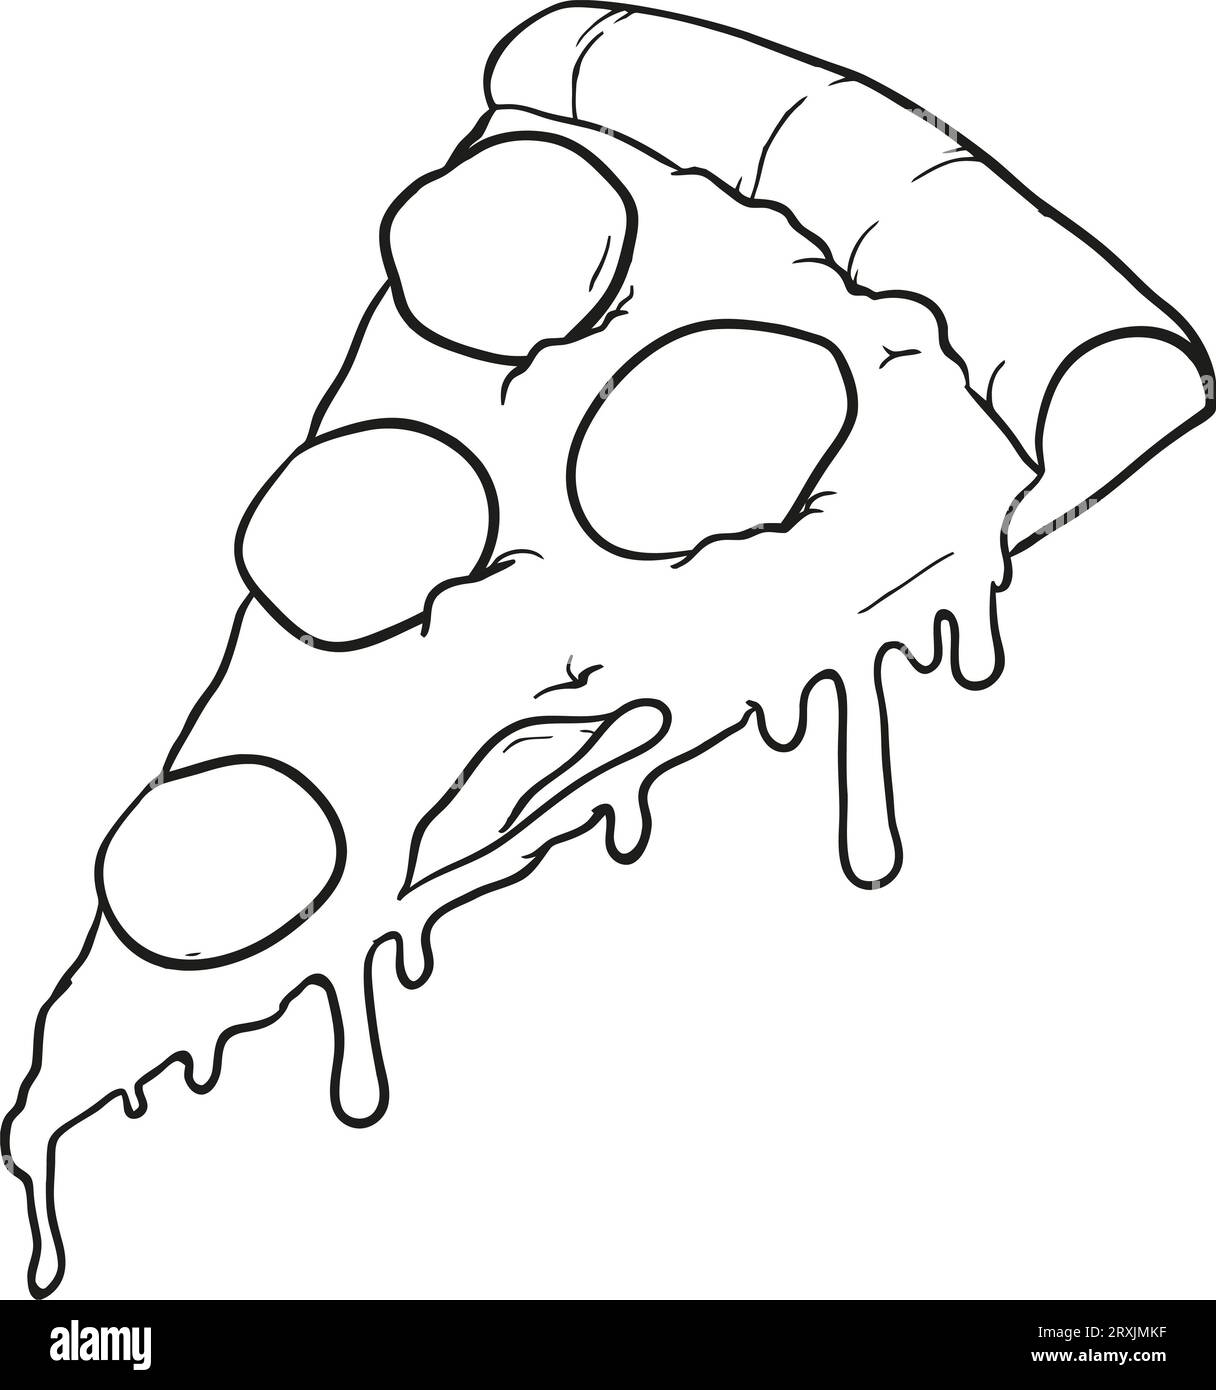 Pizza pie coloring page for kids art Stock Photo